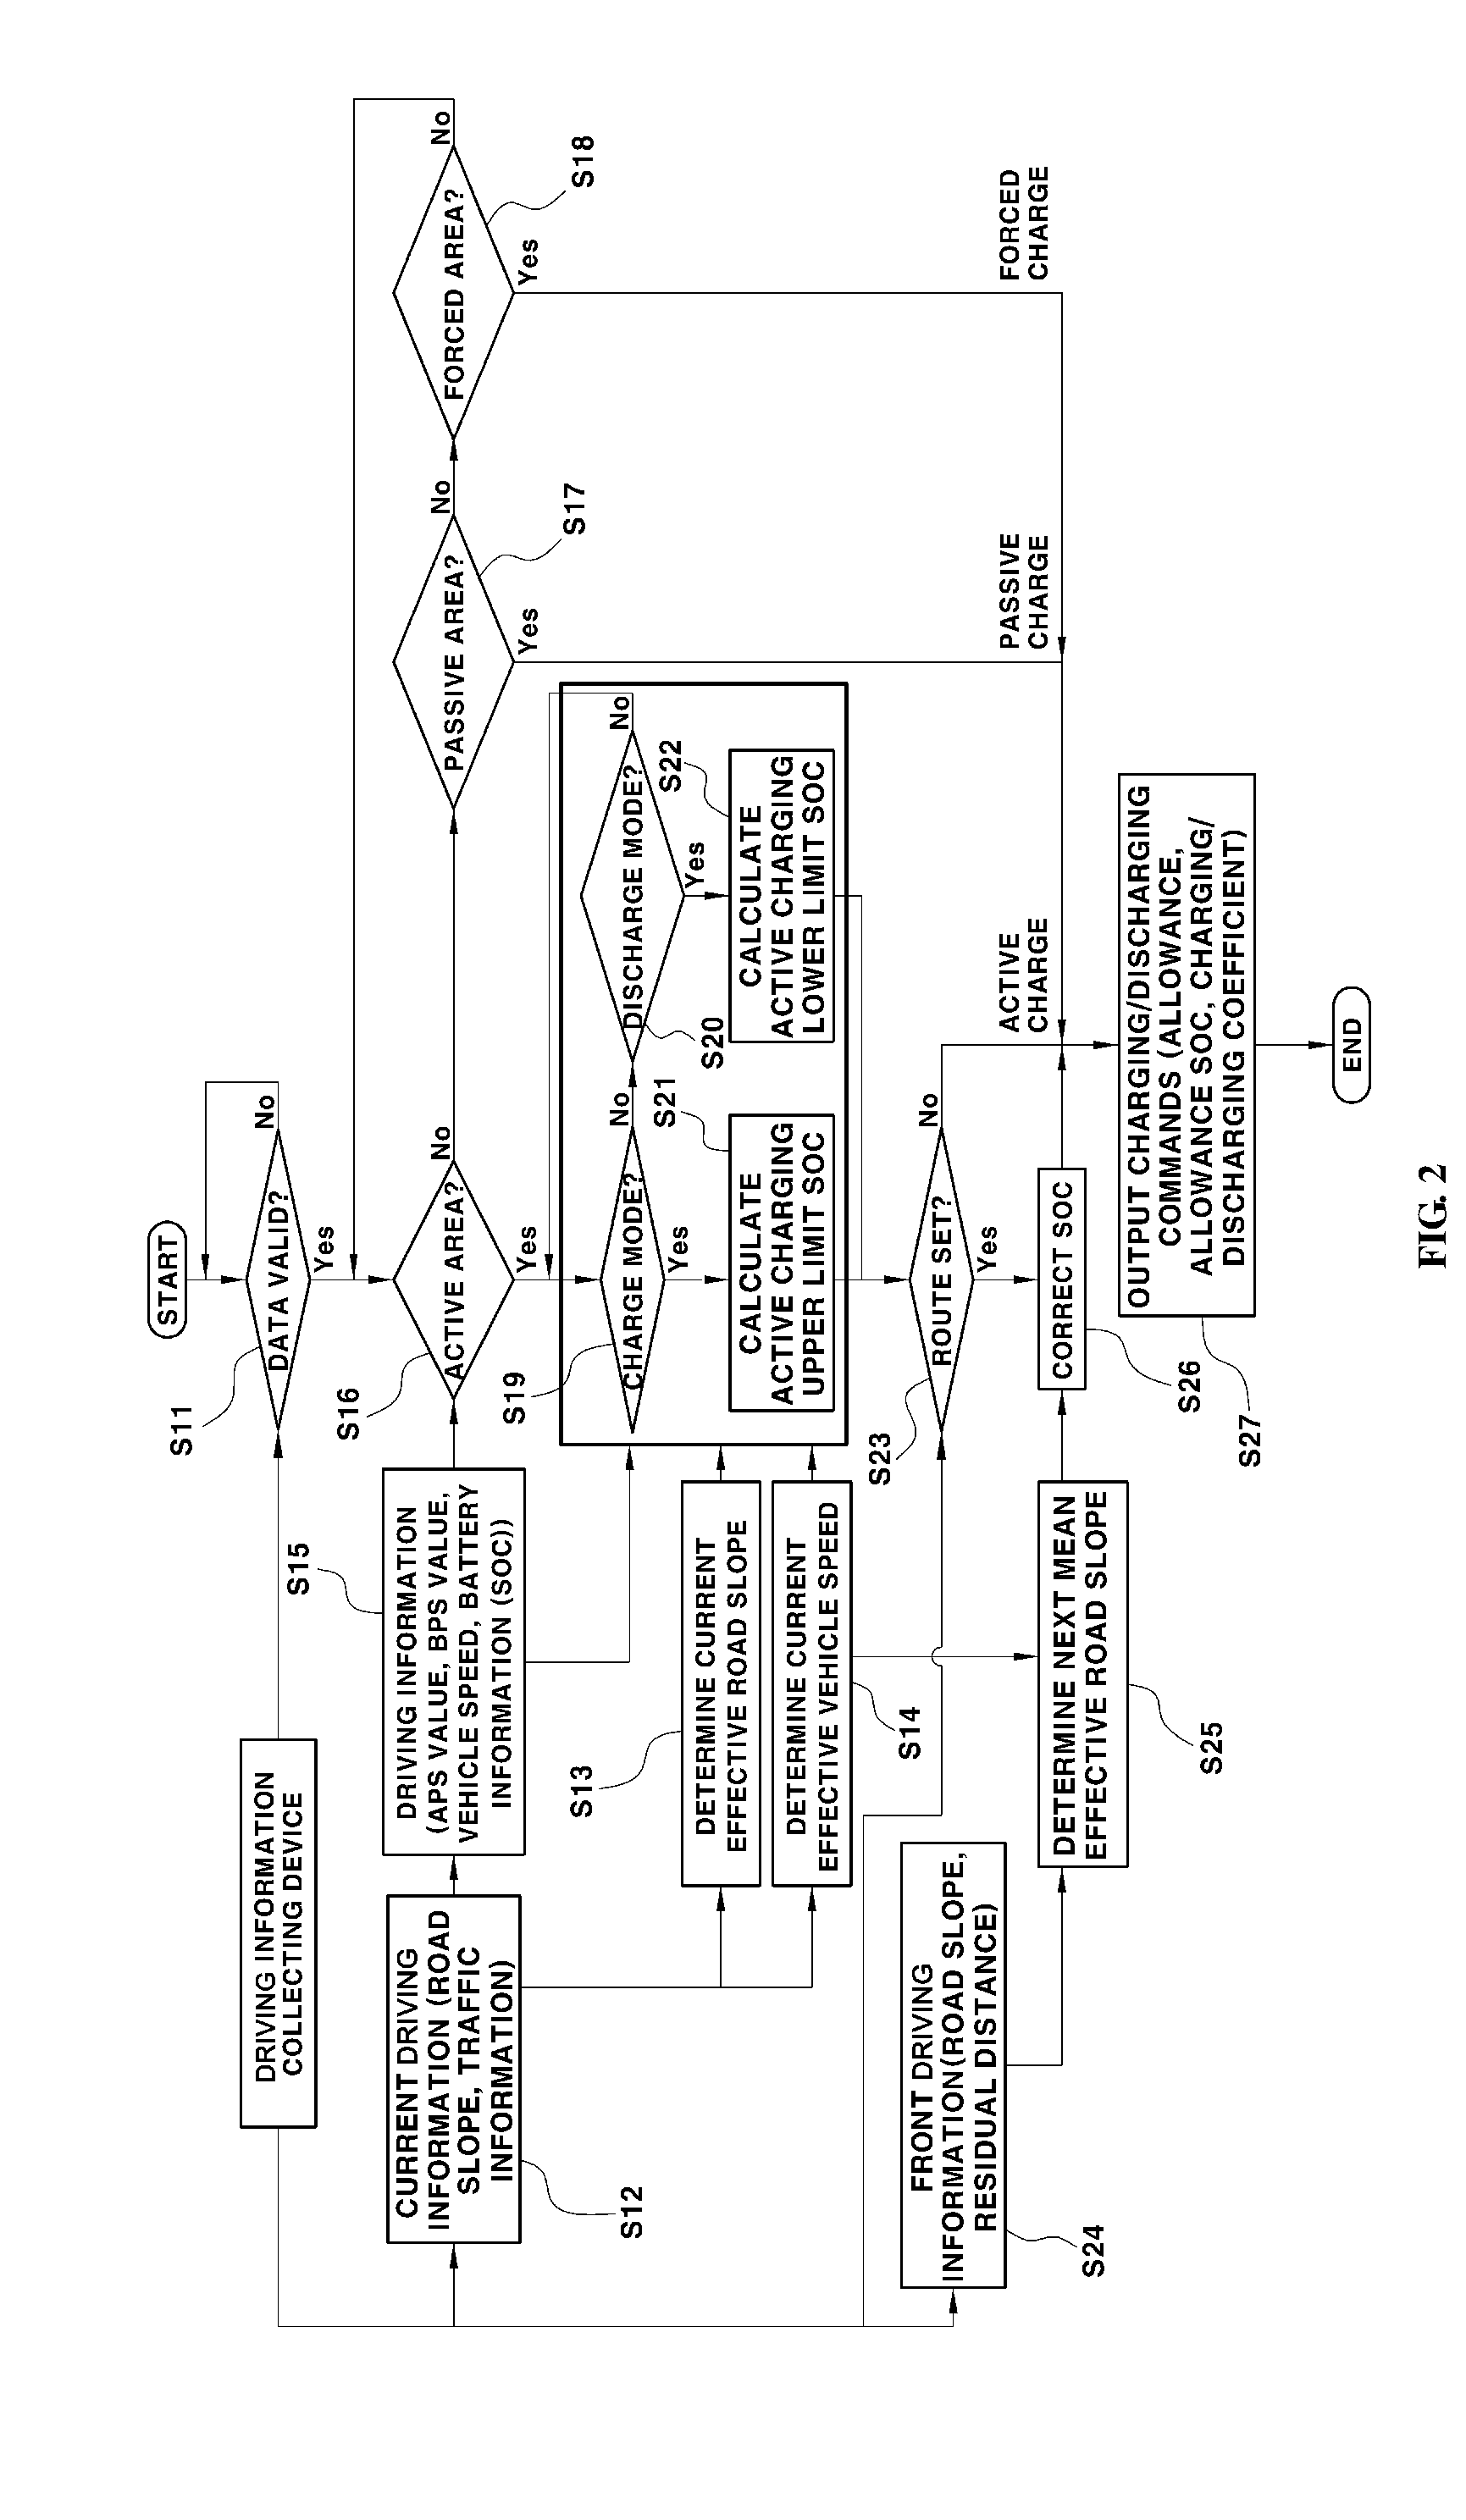 Apparatus and method for controlling battery state of charge in hybrid electric vehicle